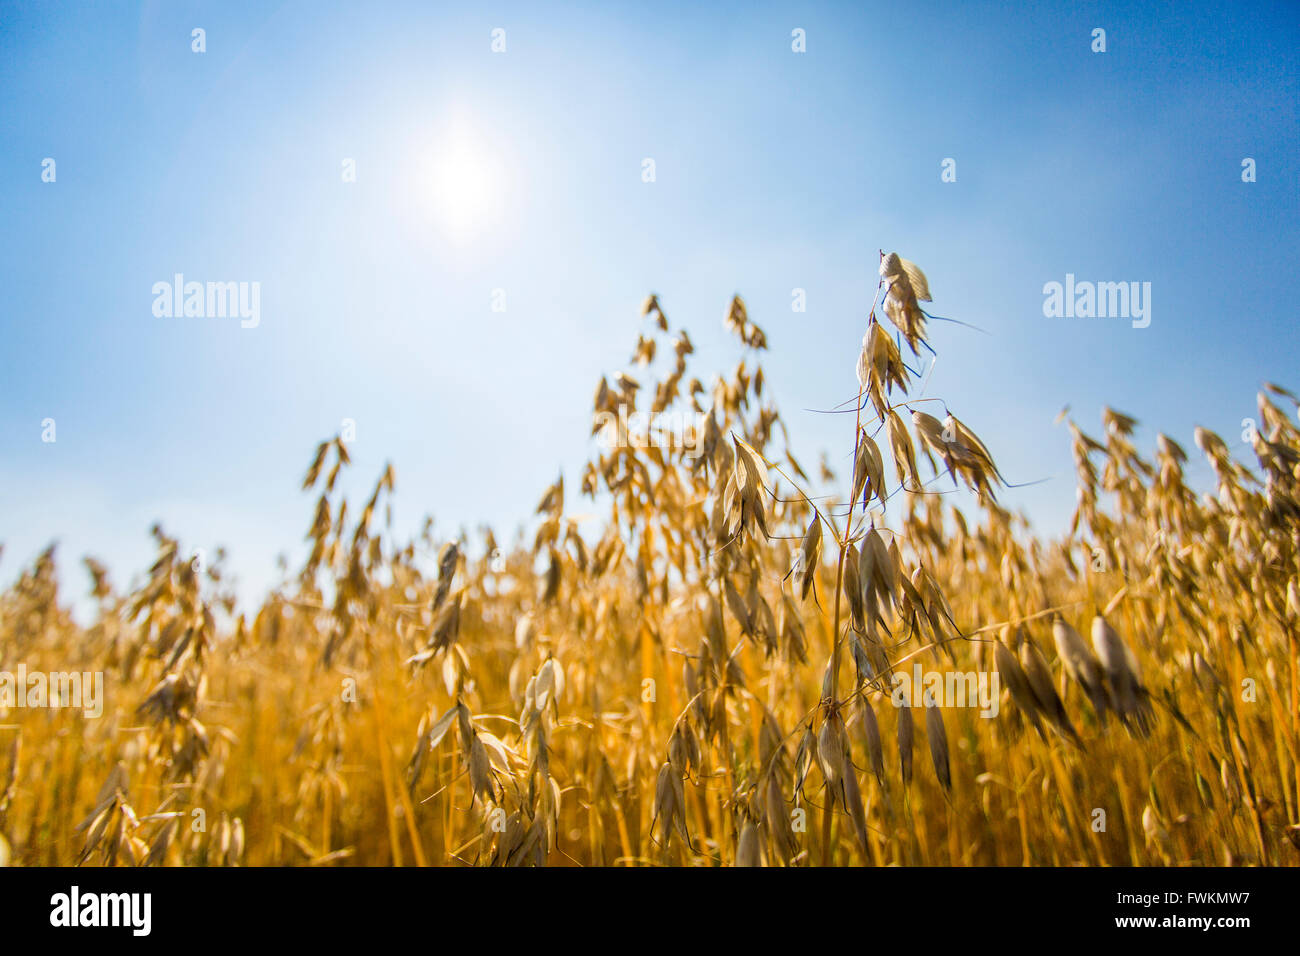 Gold field in Hebei province, China Stock Photo